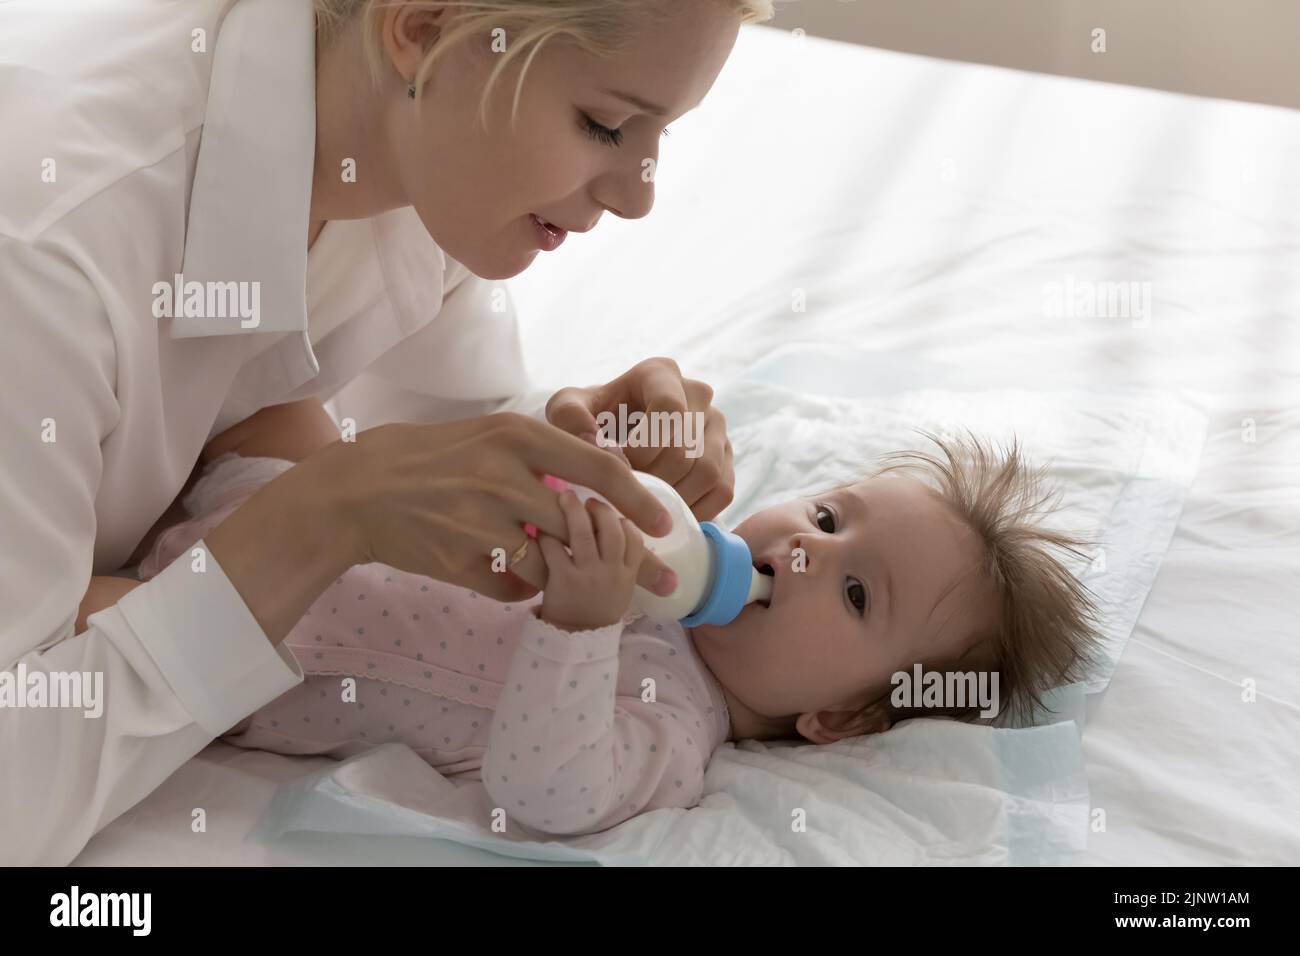 Adorable baby lying on bed sucking milk from bottle Stock Photo